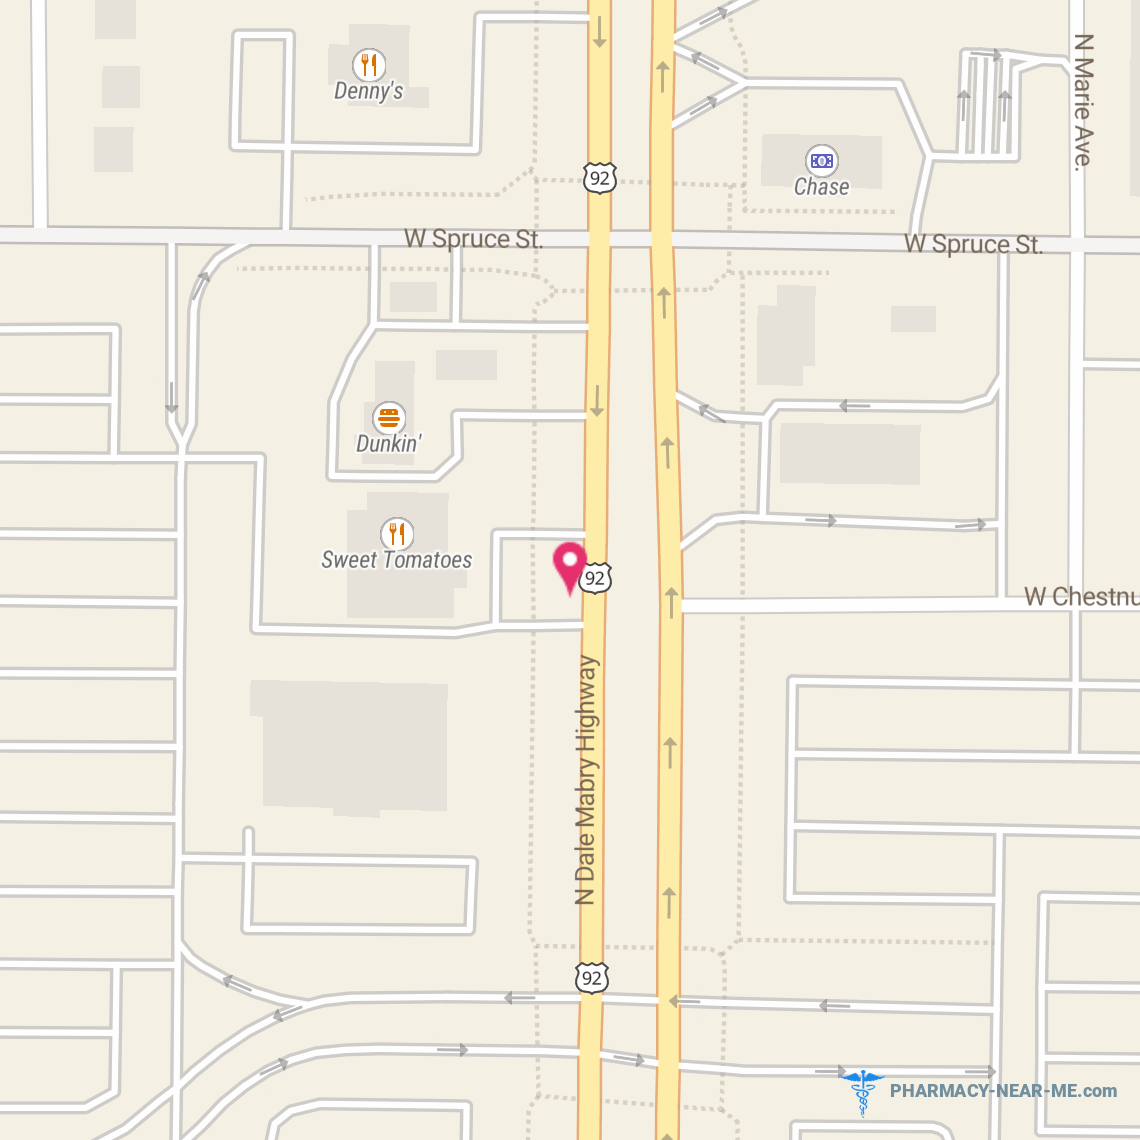 CVS PHARMACY #17132 - Pharmacy Hours, Phone, Reviews & Information: 1544 North Dale Mabry Highway, Tampa, Florida 33607, United States